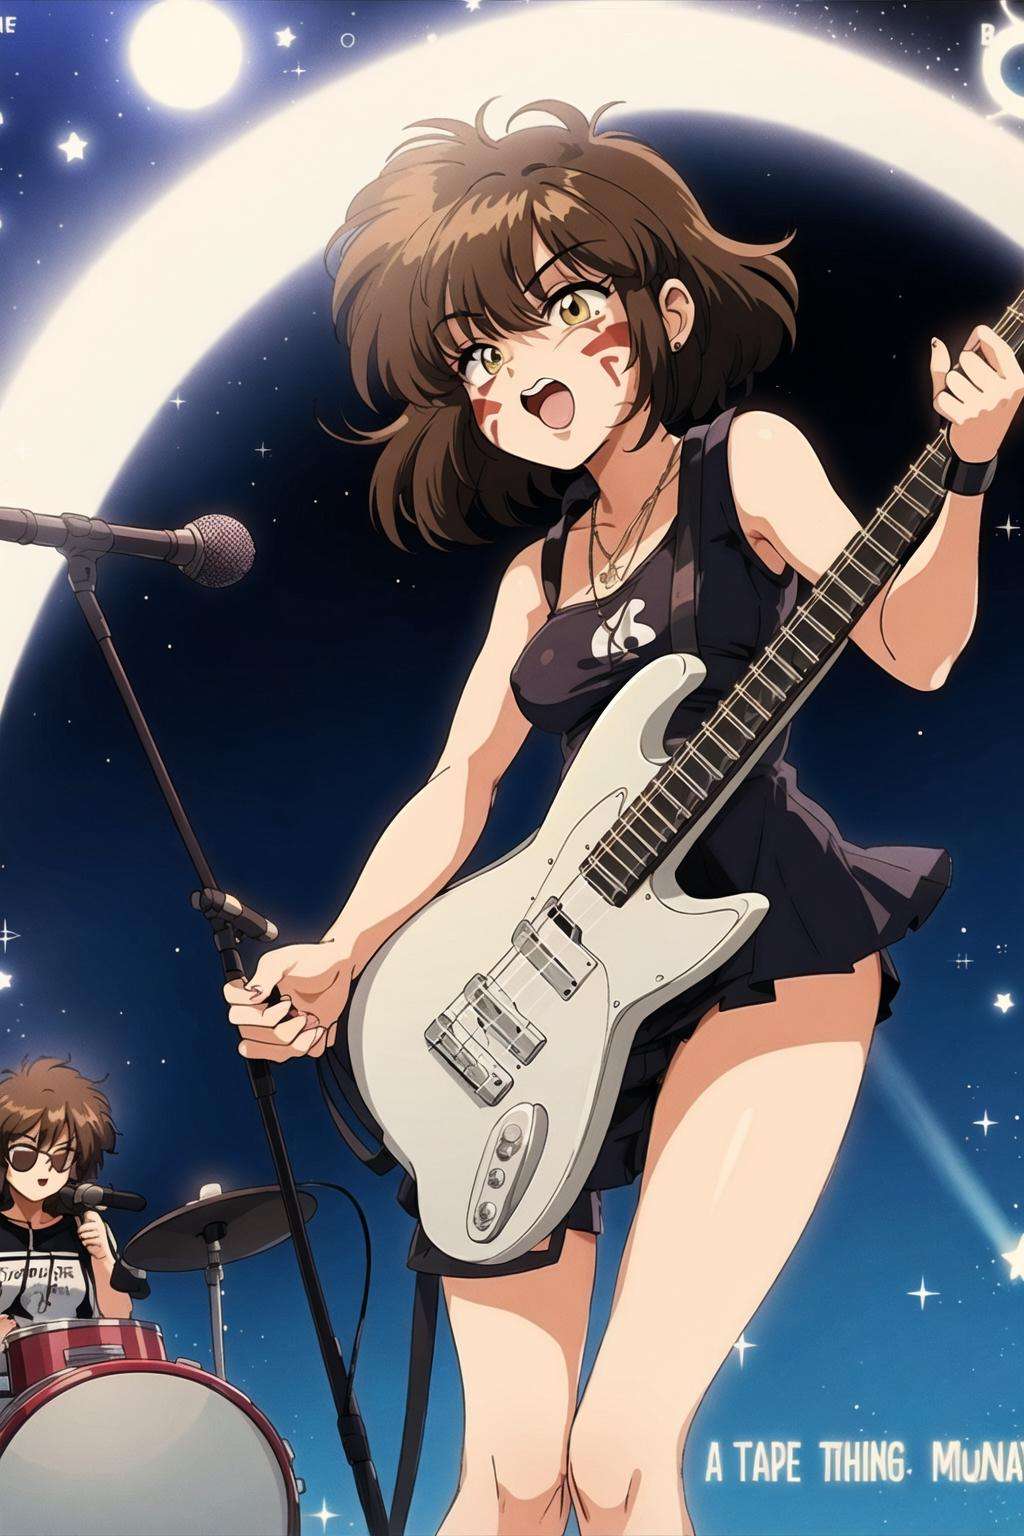 1980s \(style\), bluethebone,  1girl, acoustic guitar, album cover, bass guitar, brown hair, card \(medium\), crescent moon, electric guitar, facepaint, facial mark, full moon, guitar, holding instrument, instrument, microphone, microphone stand, moon, music, night, night sky, open mouth, planet, playing instrument, plectrum, shooting star, sky, space, star \(sky\), star \(symbol\), star necklace, starry background, starry sky, sun, sunglasses <lora:bluethebone1.9:0.6>